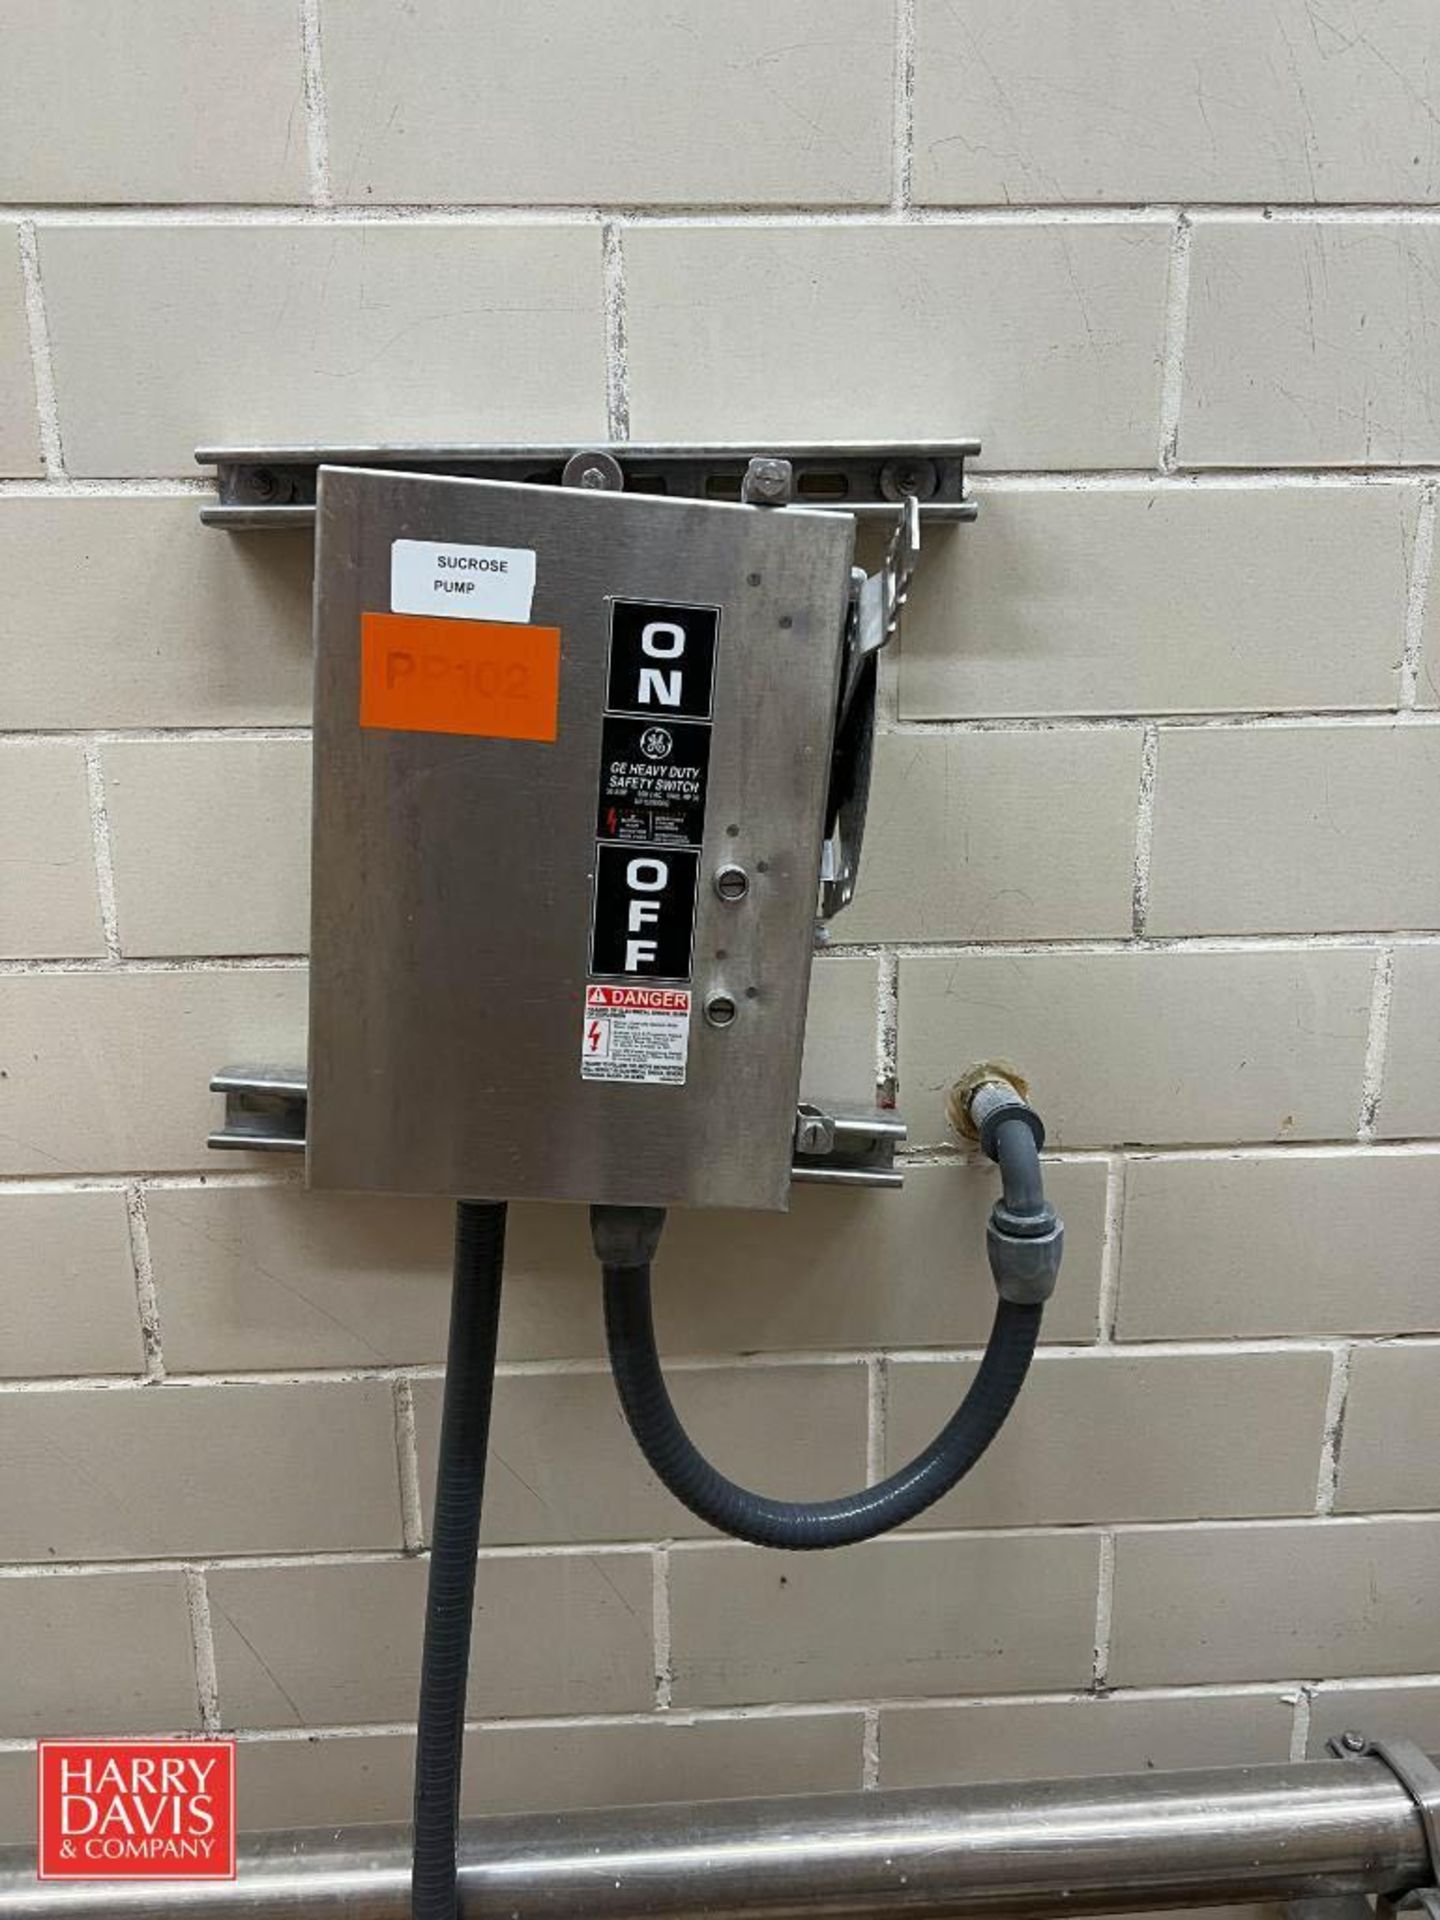 GE Heavy Duty S/S Safety Switches - Rigging Fee: $400 - Image 6 of 7